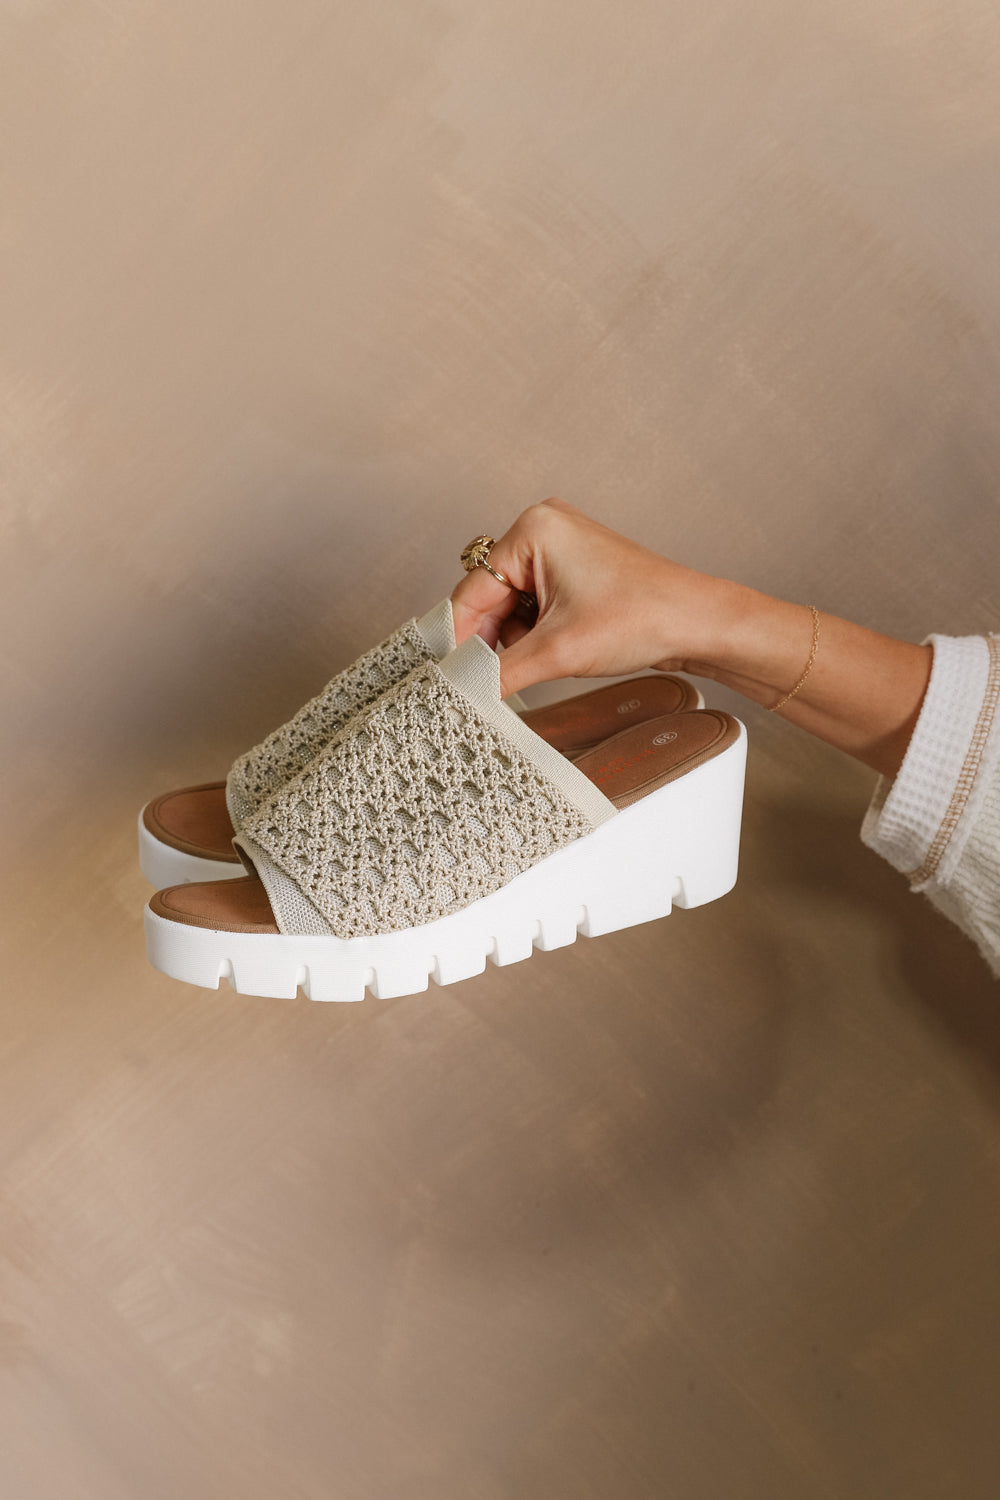 Side view of model holding the Venti Crochet Sandal in Nude Silver which features Crochet Fabric Upper, Slide On Style, Memory Foam Footbed, 2.25 Inch Platform Wedge and Flexible Rubber Outsole